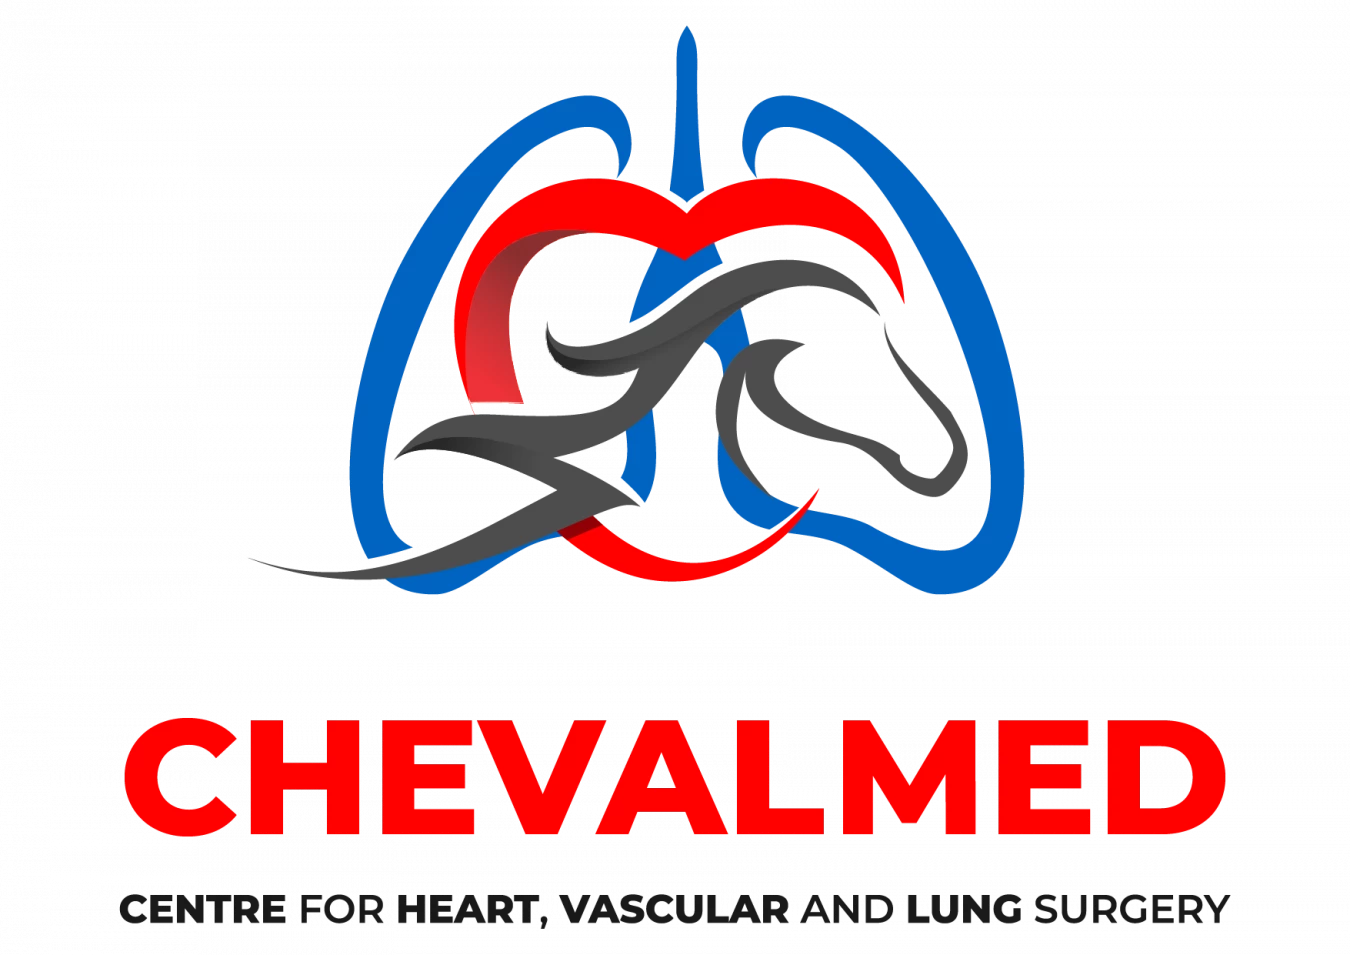 Chevalmed (Center for Heart, Vascular, and Lung Surgery)